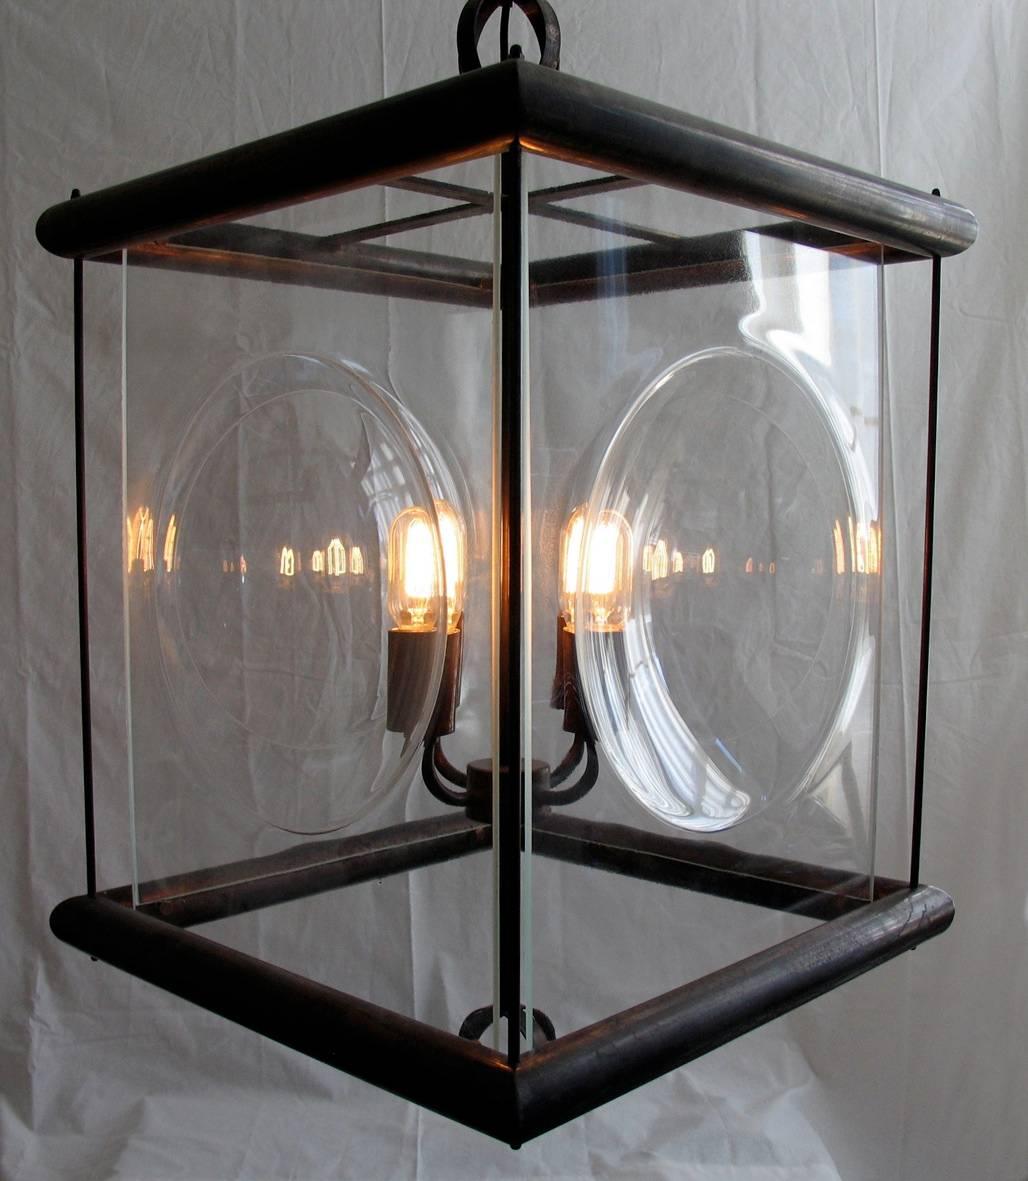 A timeless pendant lantern of brass tubing with a Rustic Bronze finish and slumped glass semi-sphere panels. Two spherical finials finish the design. 
The glass can be set as 'concave' or 'convex' 
Four E26/E27 light bulb holders. Includes 24